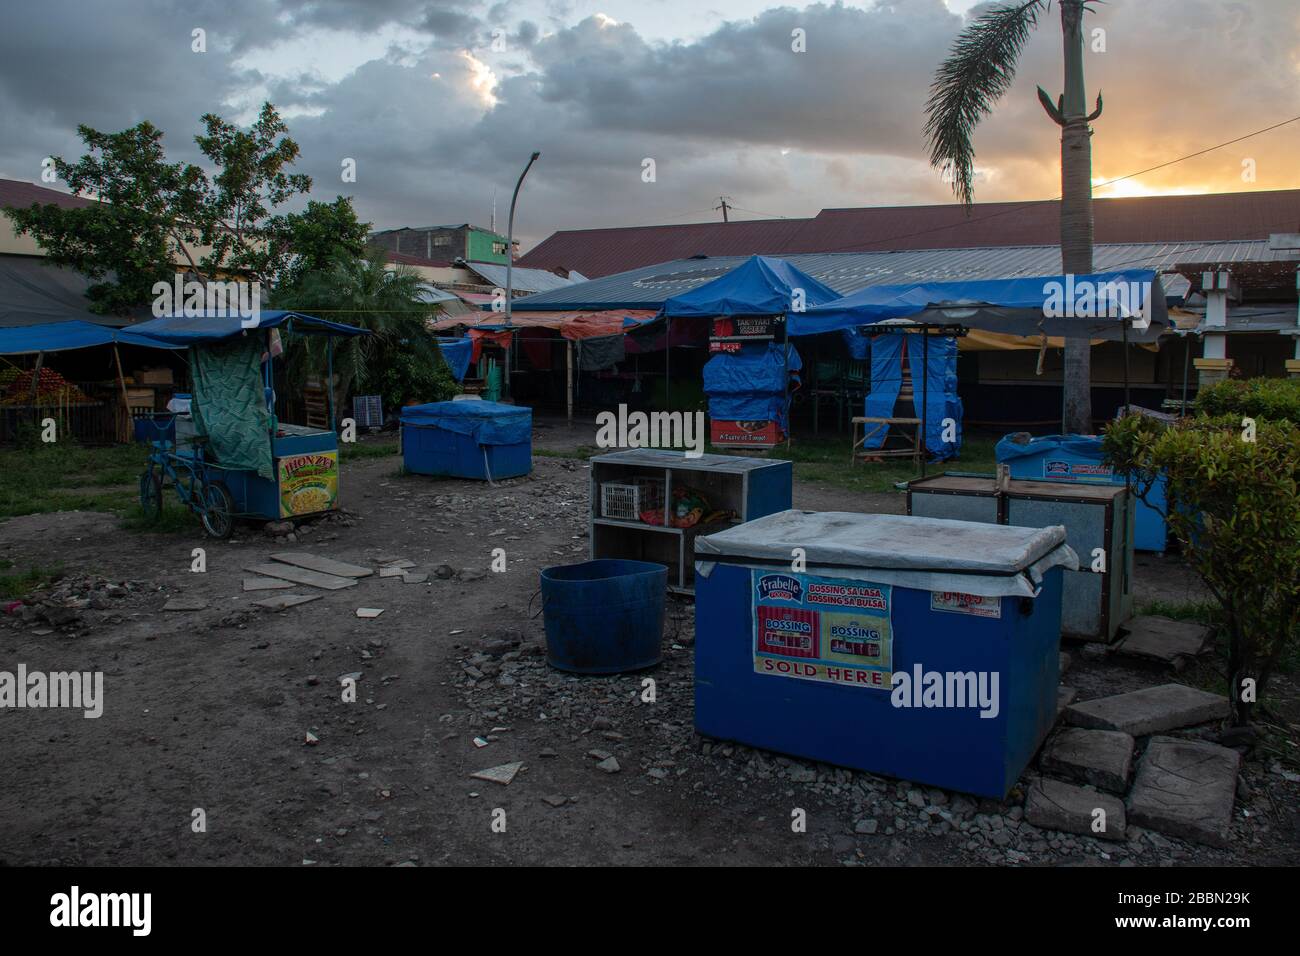 Closed stores in the Philippines due to Corona virus lock down effect in a public market Stock Photo